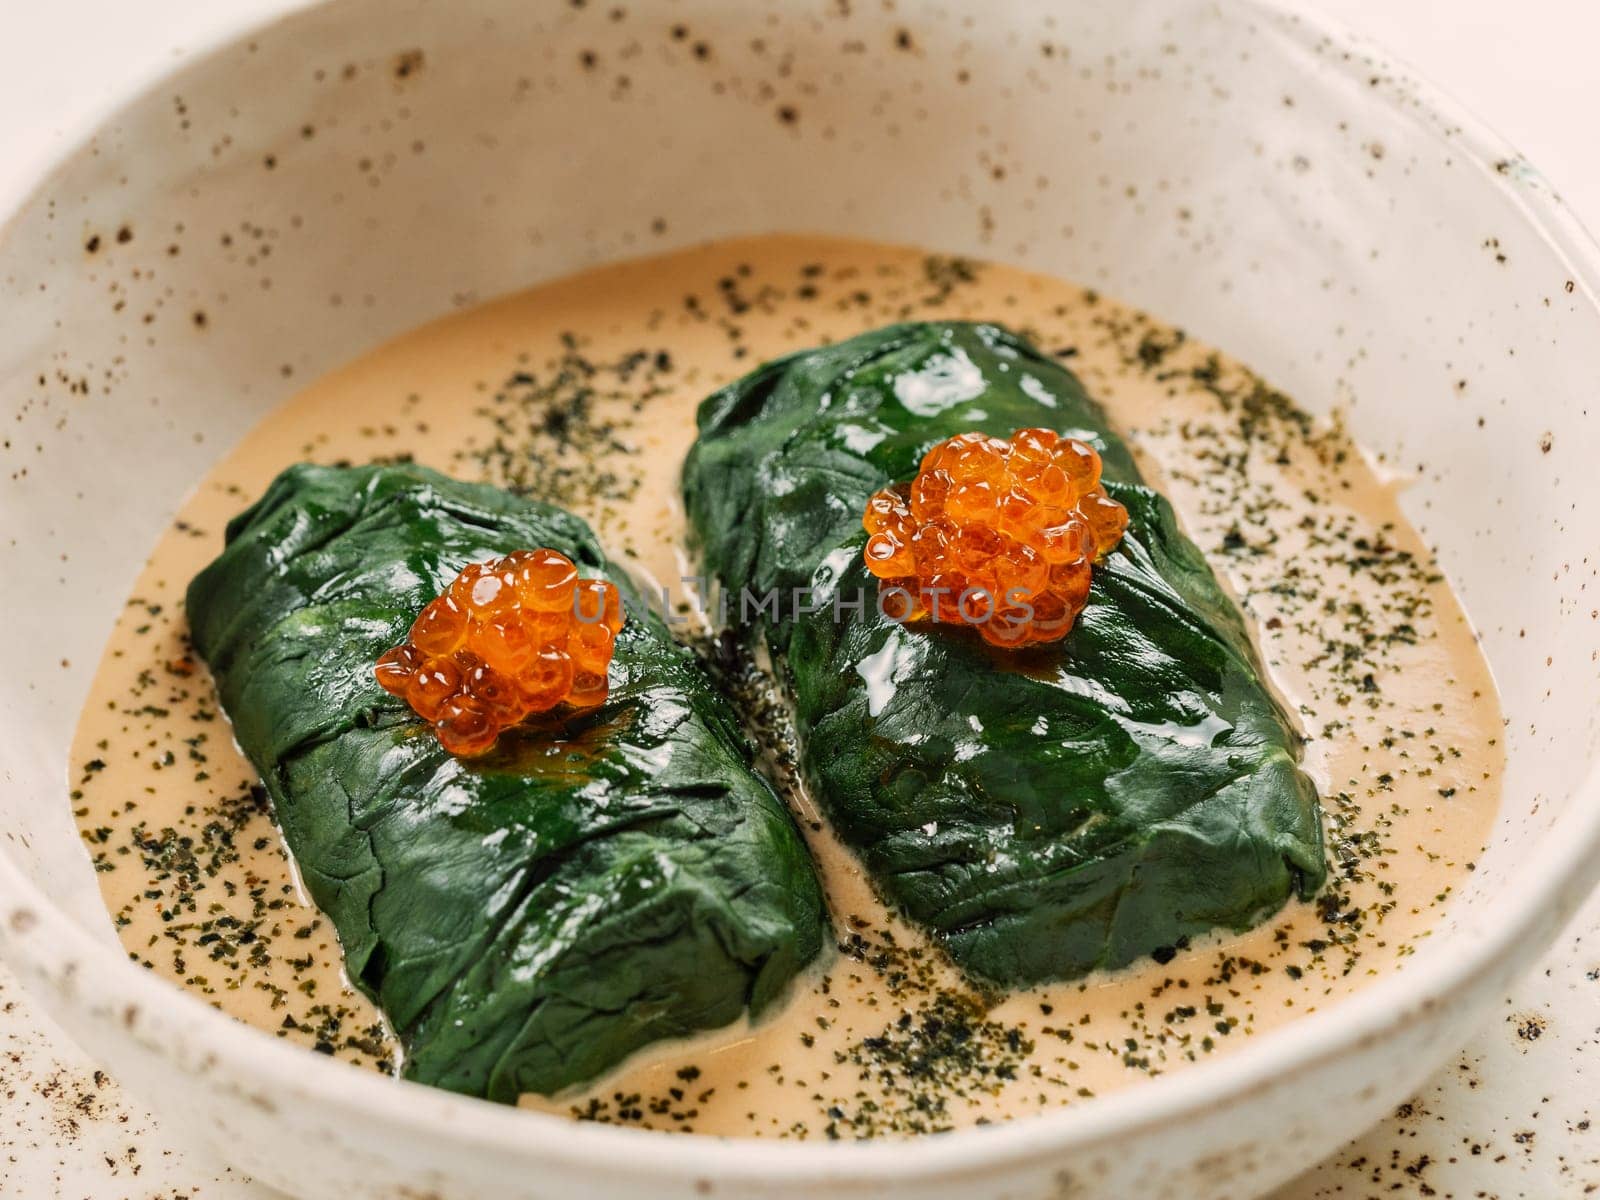 Stuffed green cabbage rolls with sauce in restaurant-style plating, served red caviar